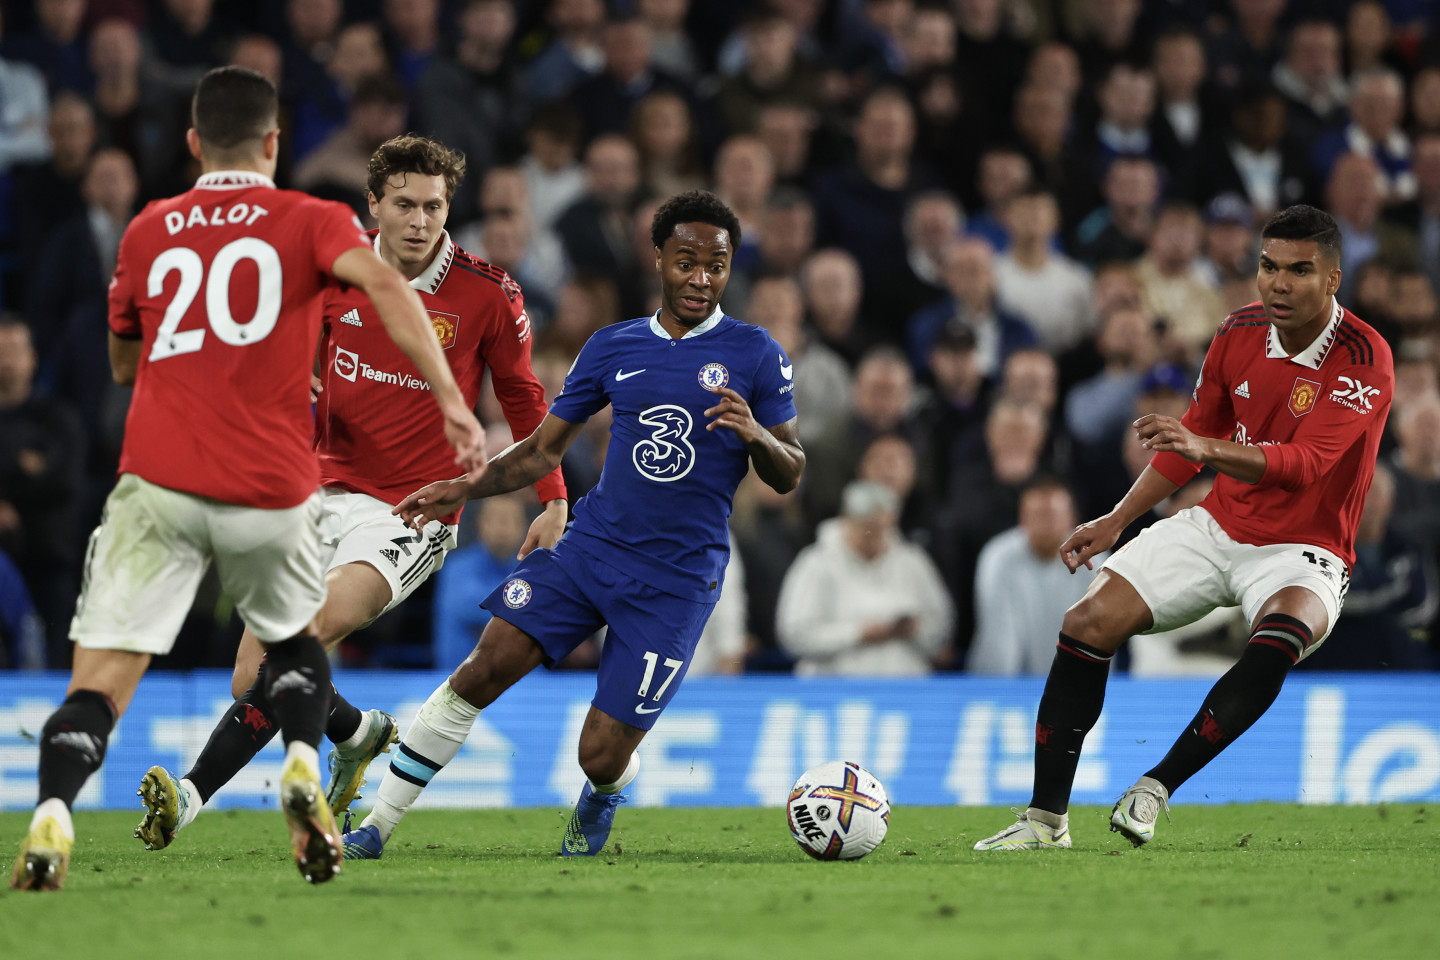 Man Utd vs Chelsea Where to watch, TV channel, kick-off time, date News Official Site Chelsea Football Club